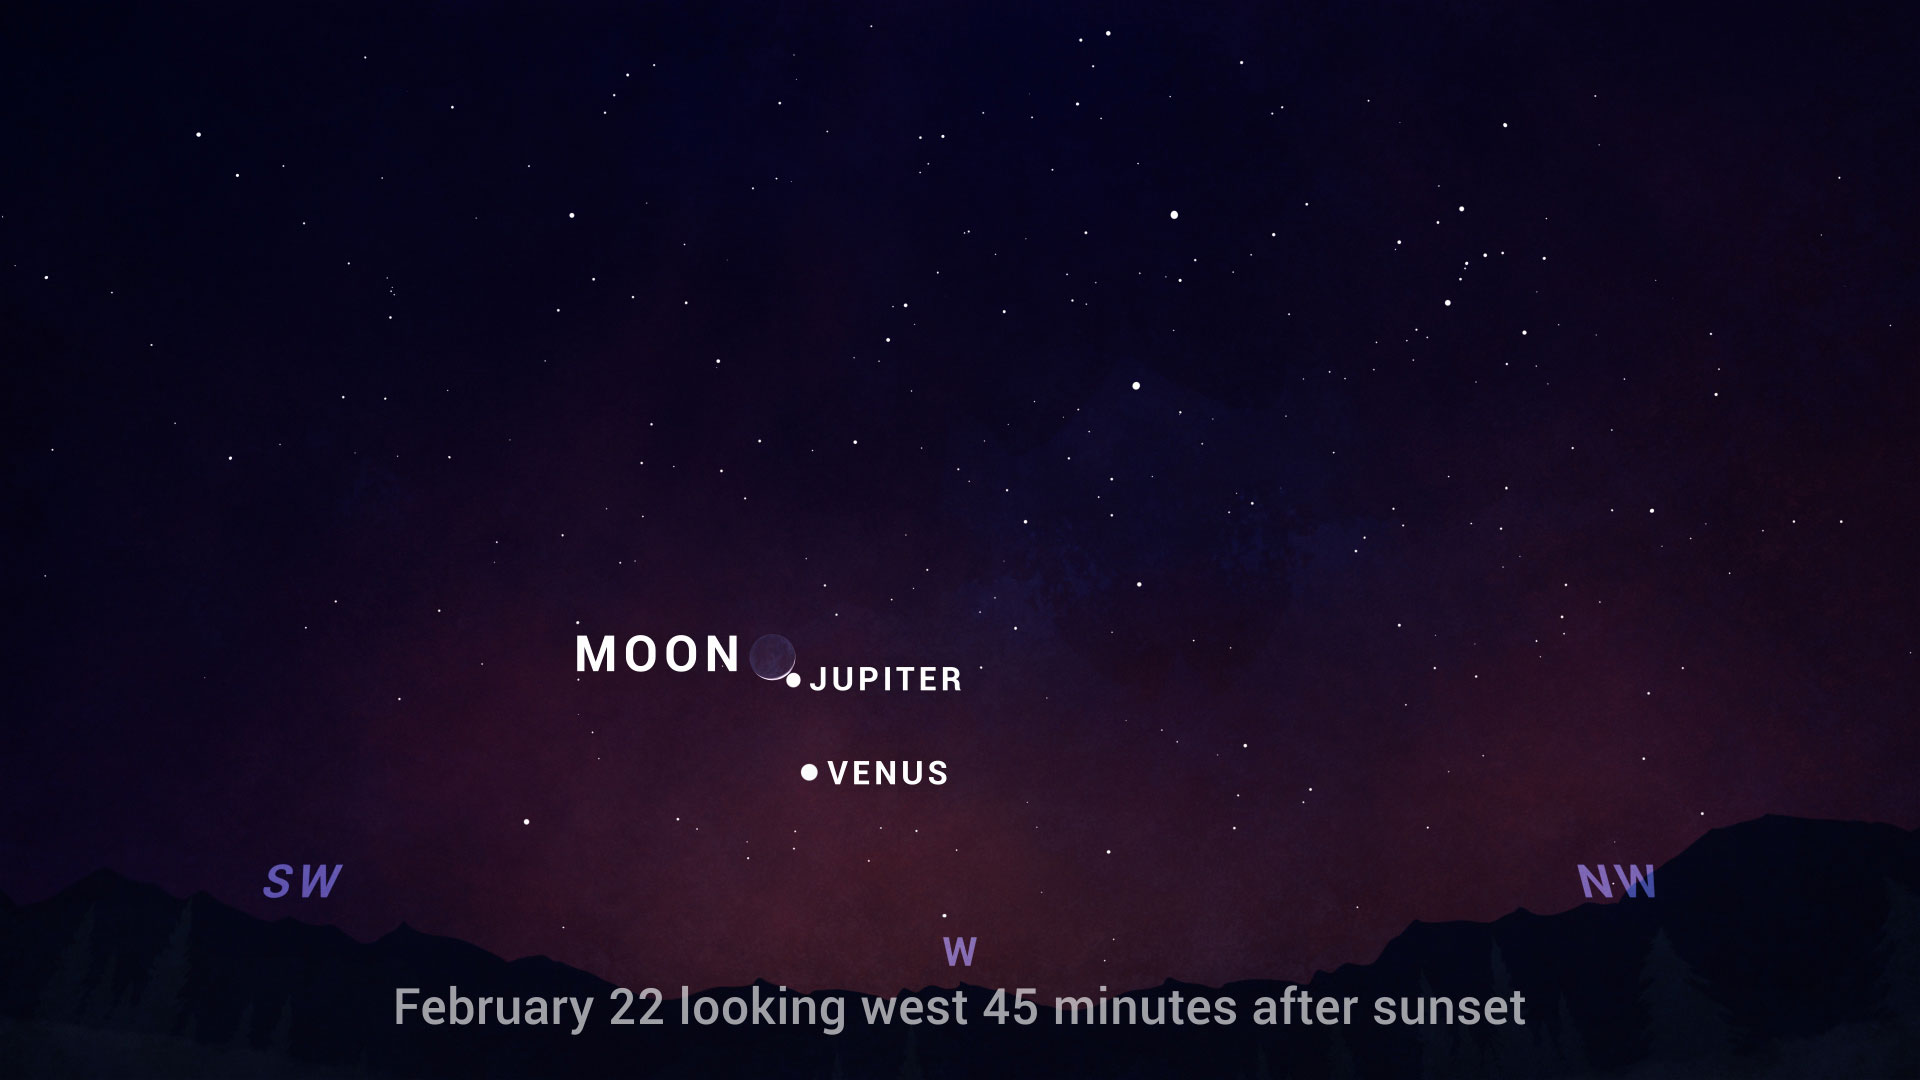 An illustrated sky chart shows the positions of the crescent Moon and planets Jupiter and Venus on February 22. Jupiter and the thin crescent Moon are near the center, about halfway up the sky. The Moon is just above and left of Jupiter. Venus is a small distance away, below Jupiter.